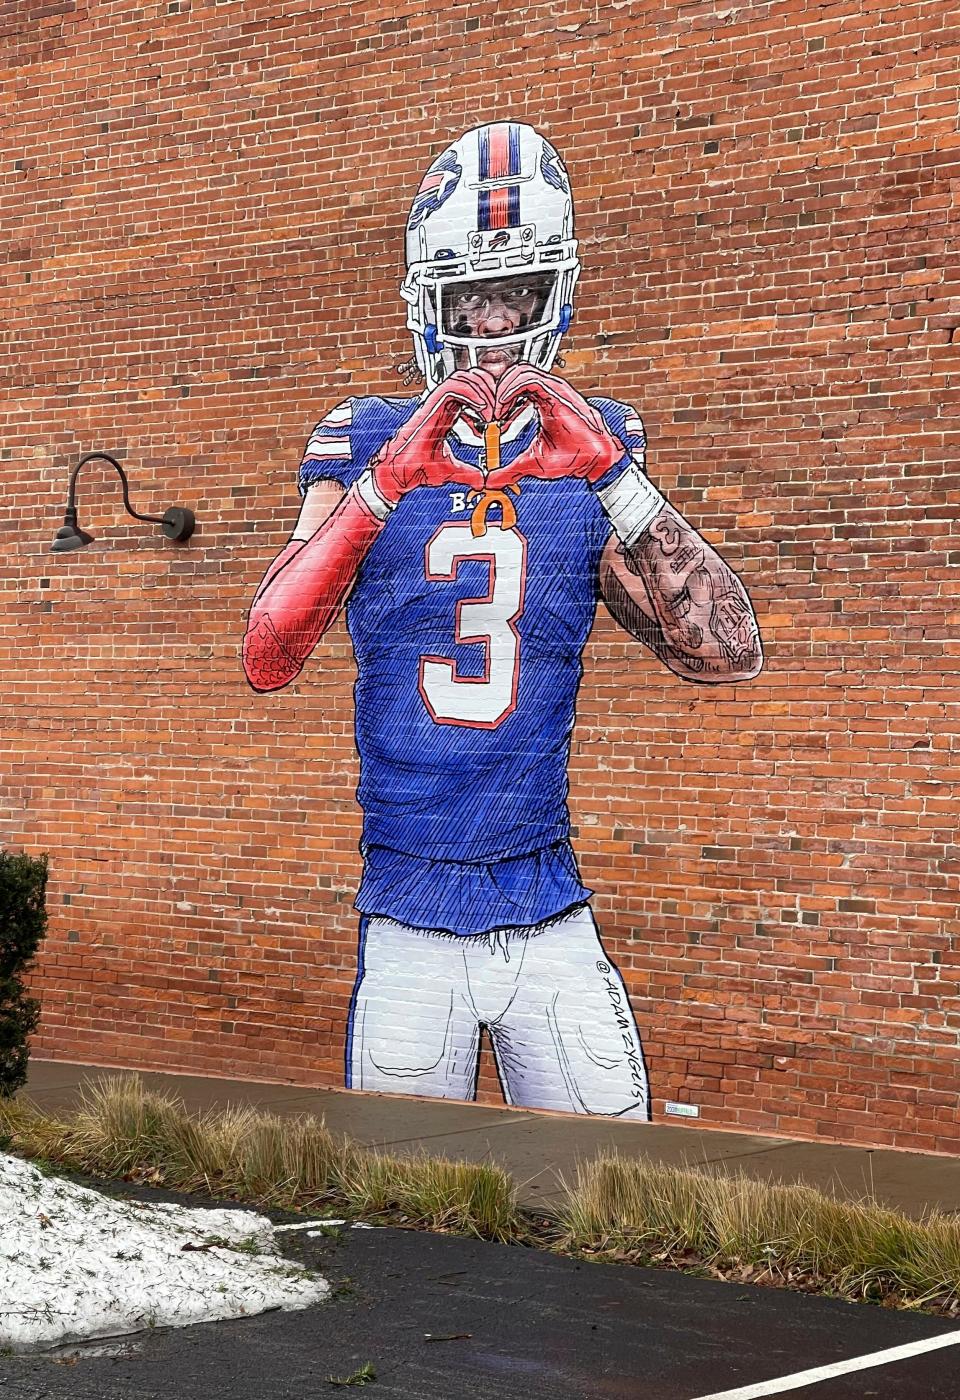 A mural by artist Adam Zyglis of Buffalo Bills player Damar Hamlin, who is recovering after going into cardiac arrest during a game Jan. 2, covers the outside of a building in Buffalo, N.Y., on Wednesday, Jan. 18, 2023. (AP Photo/Carolyn Thompson)